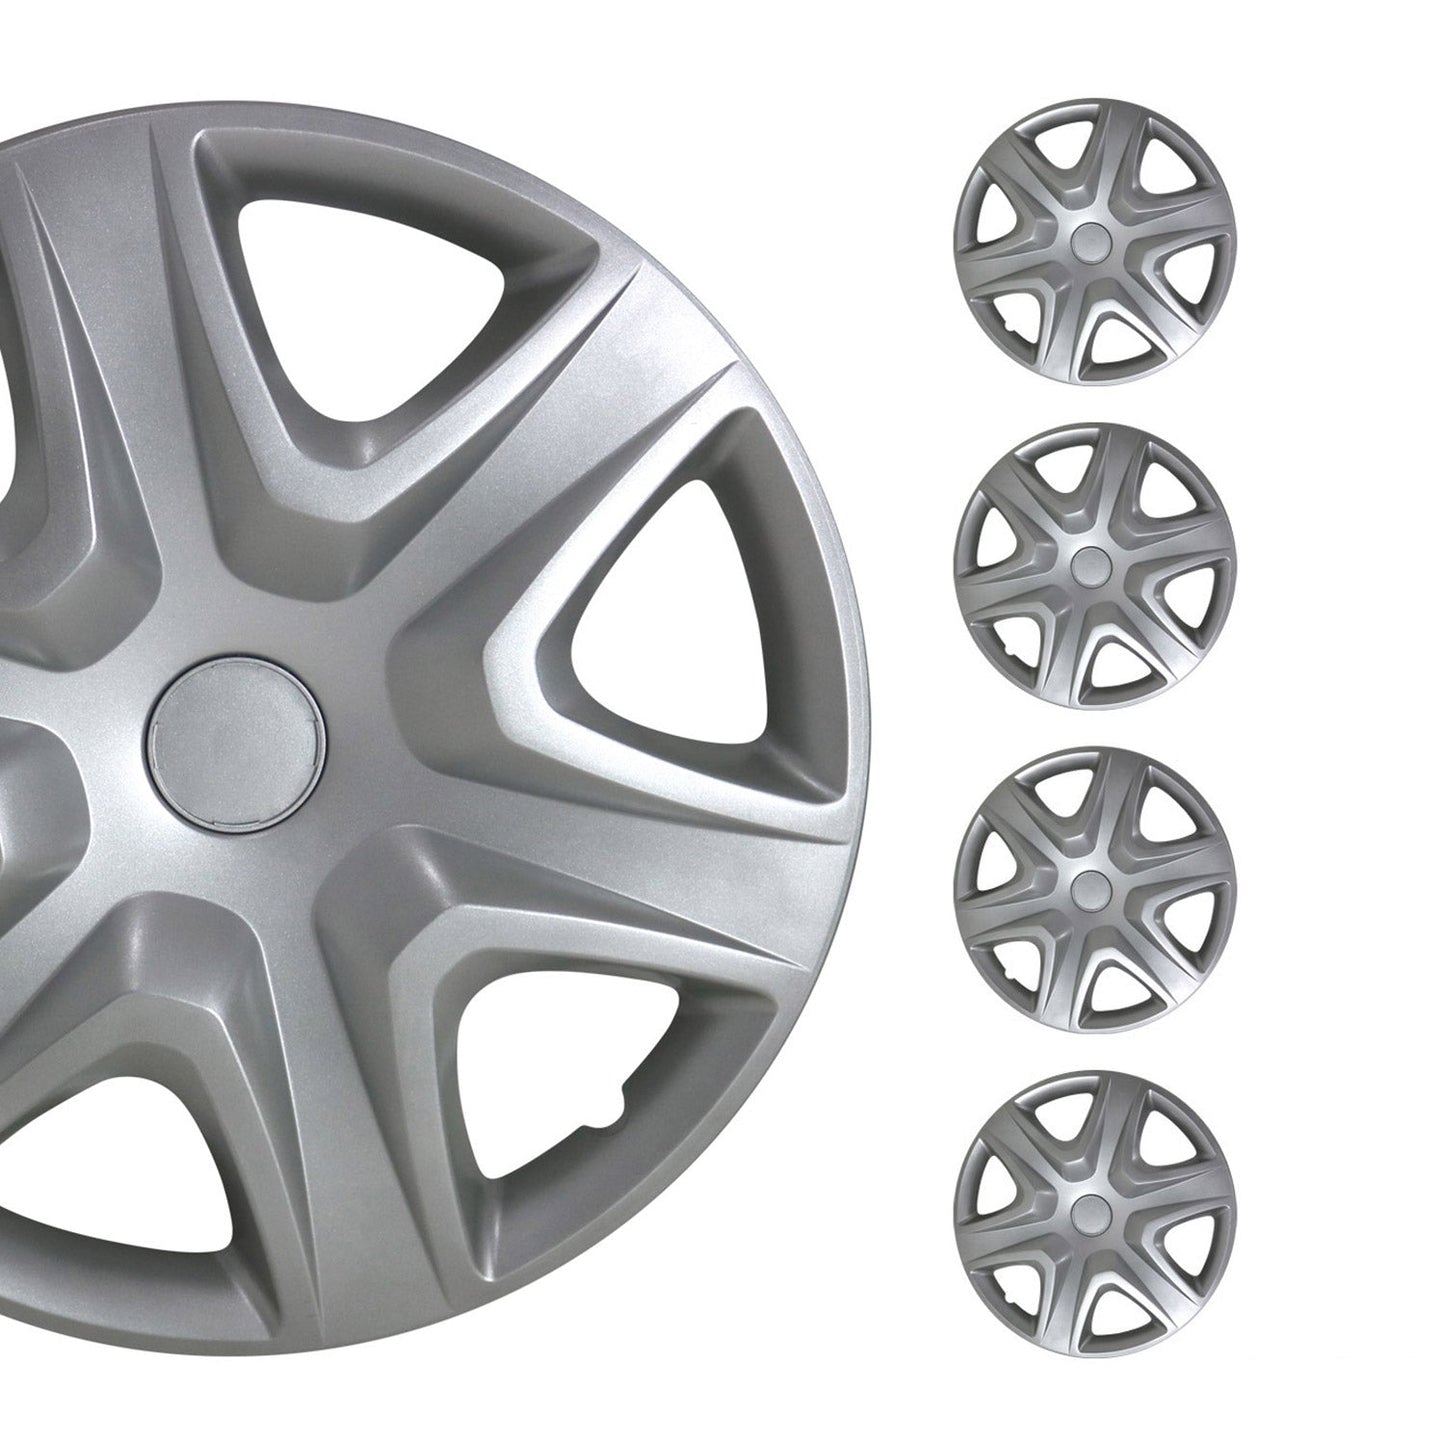 OMAC 15" 4x Wheel Covers Hubcaps for Nissan Versa ABS Silver U030027